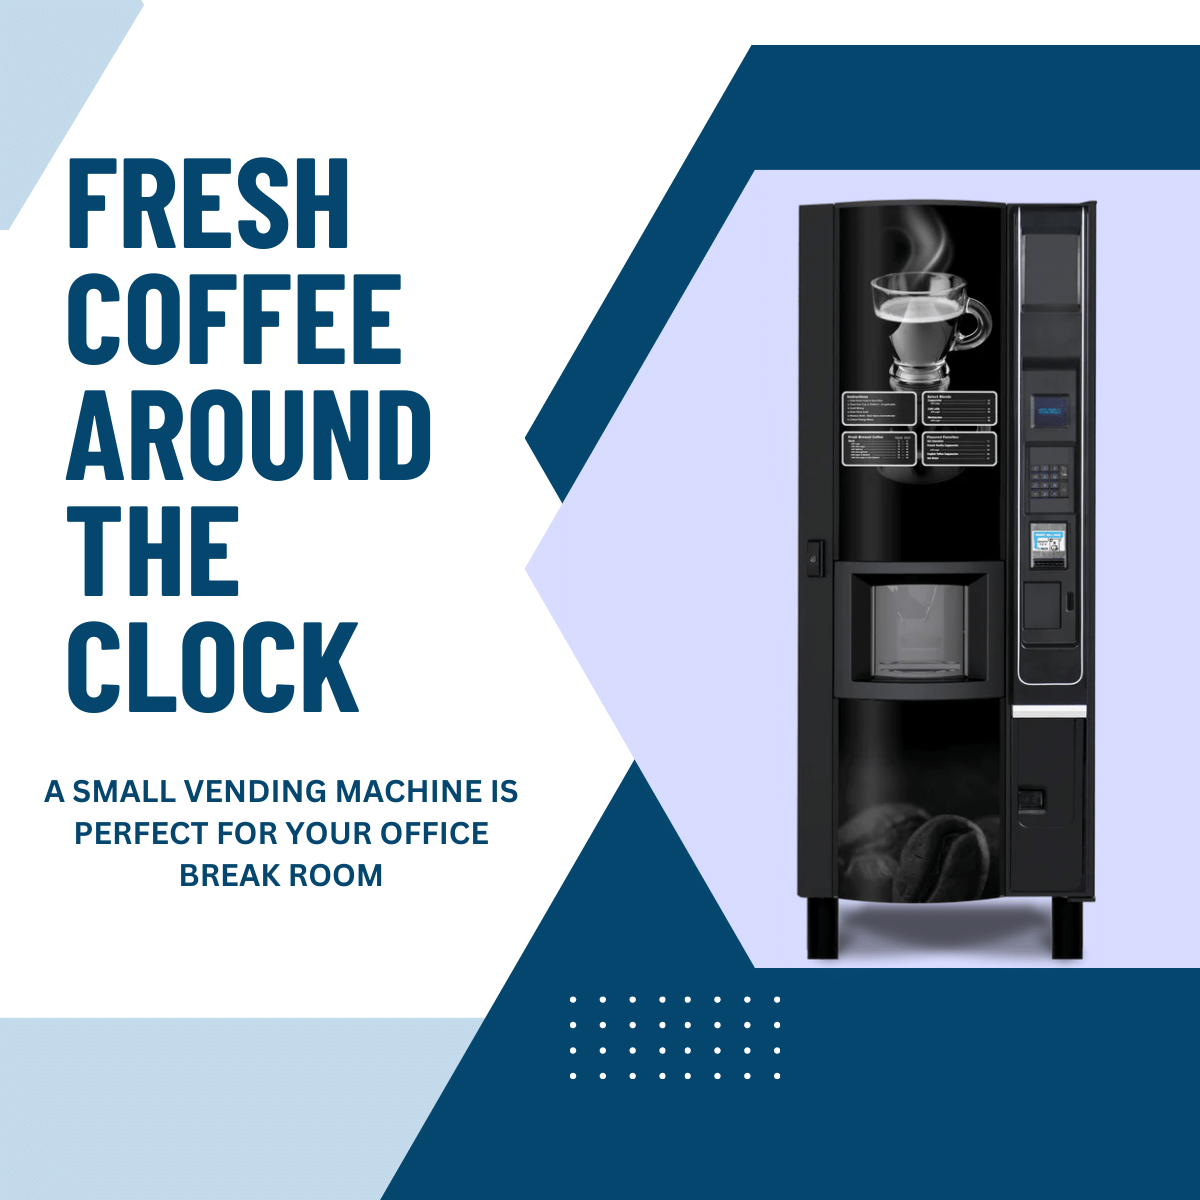 A SMALL VENDING MACHINE IS PERFECT FOR YOUR OFFICE BREAK ROOM